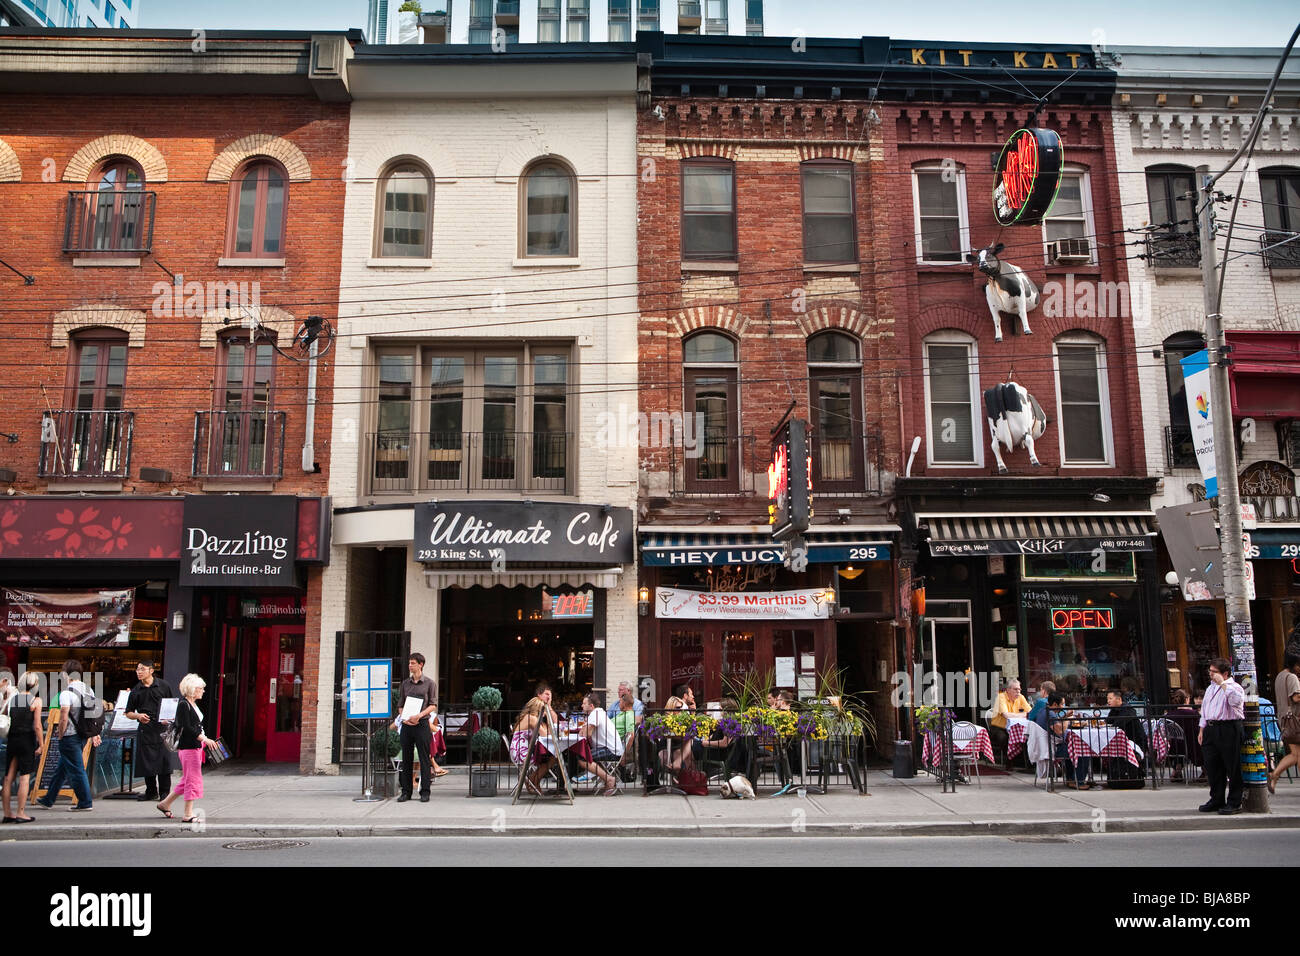 Toronto restaurants in the summer, King St. West, Theatre district, tourist area Stock Photo